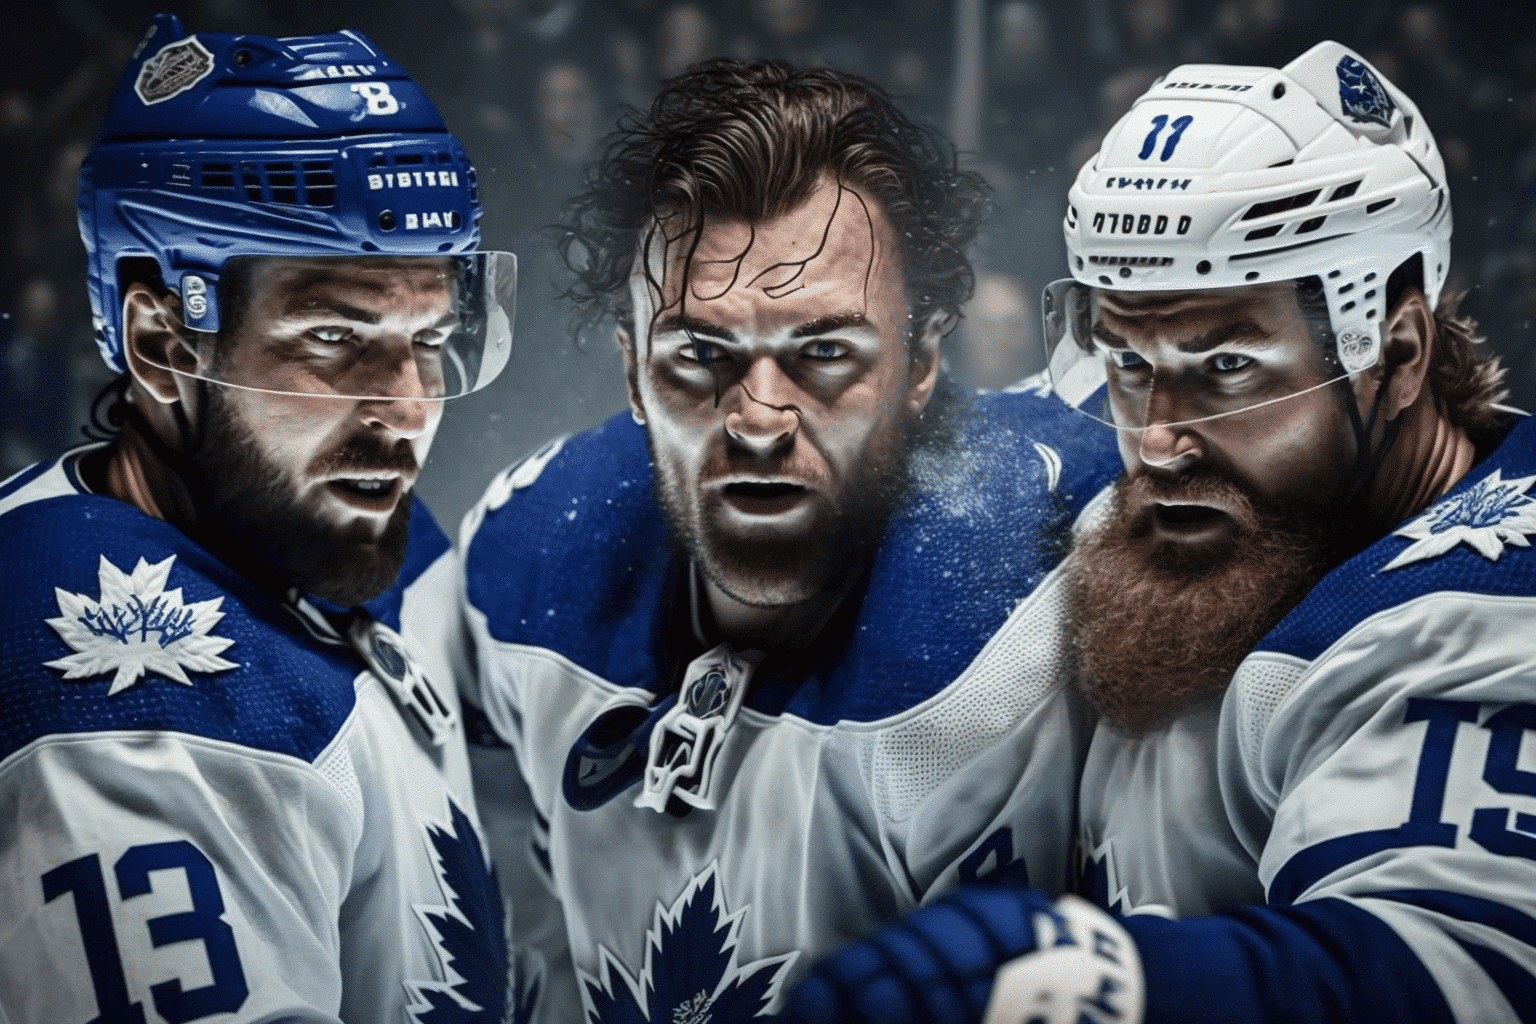 NHL playoffs see major upsets, Toronto Maple Leafs emerge as favorites